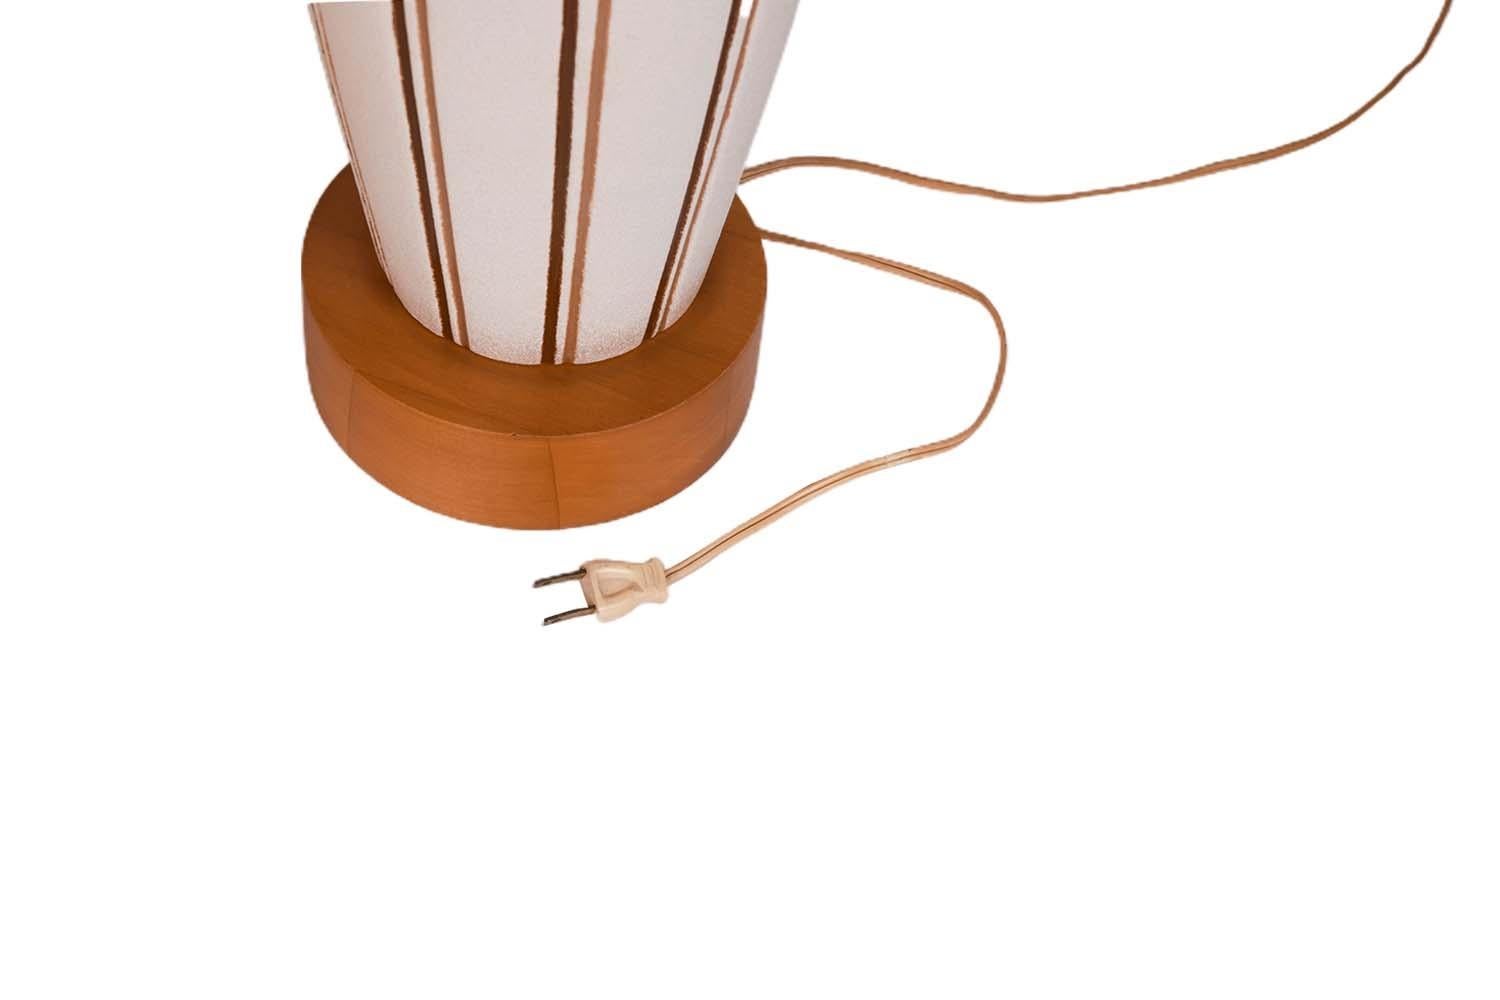 A beautiful pair of vintage Danish Modern style pottery table lamps with original drum shades, circa 1960s. They feature white ceramic urn or bottle form bases with brown and tan vertical stripes on solid walnut stands and turned walnut necks. The